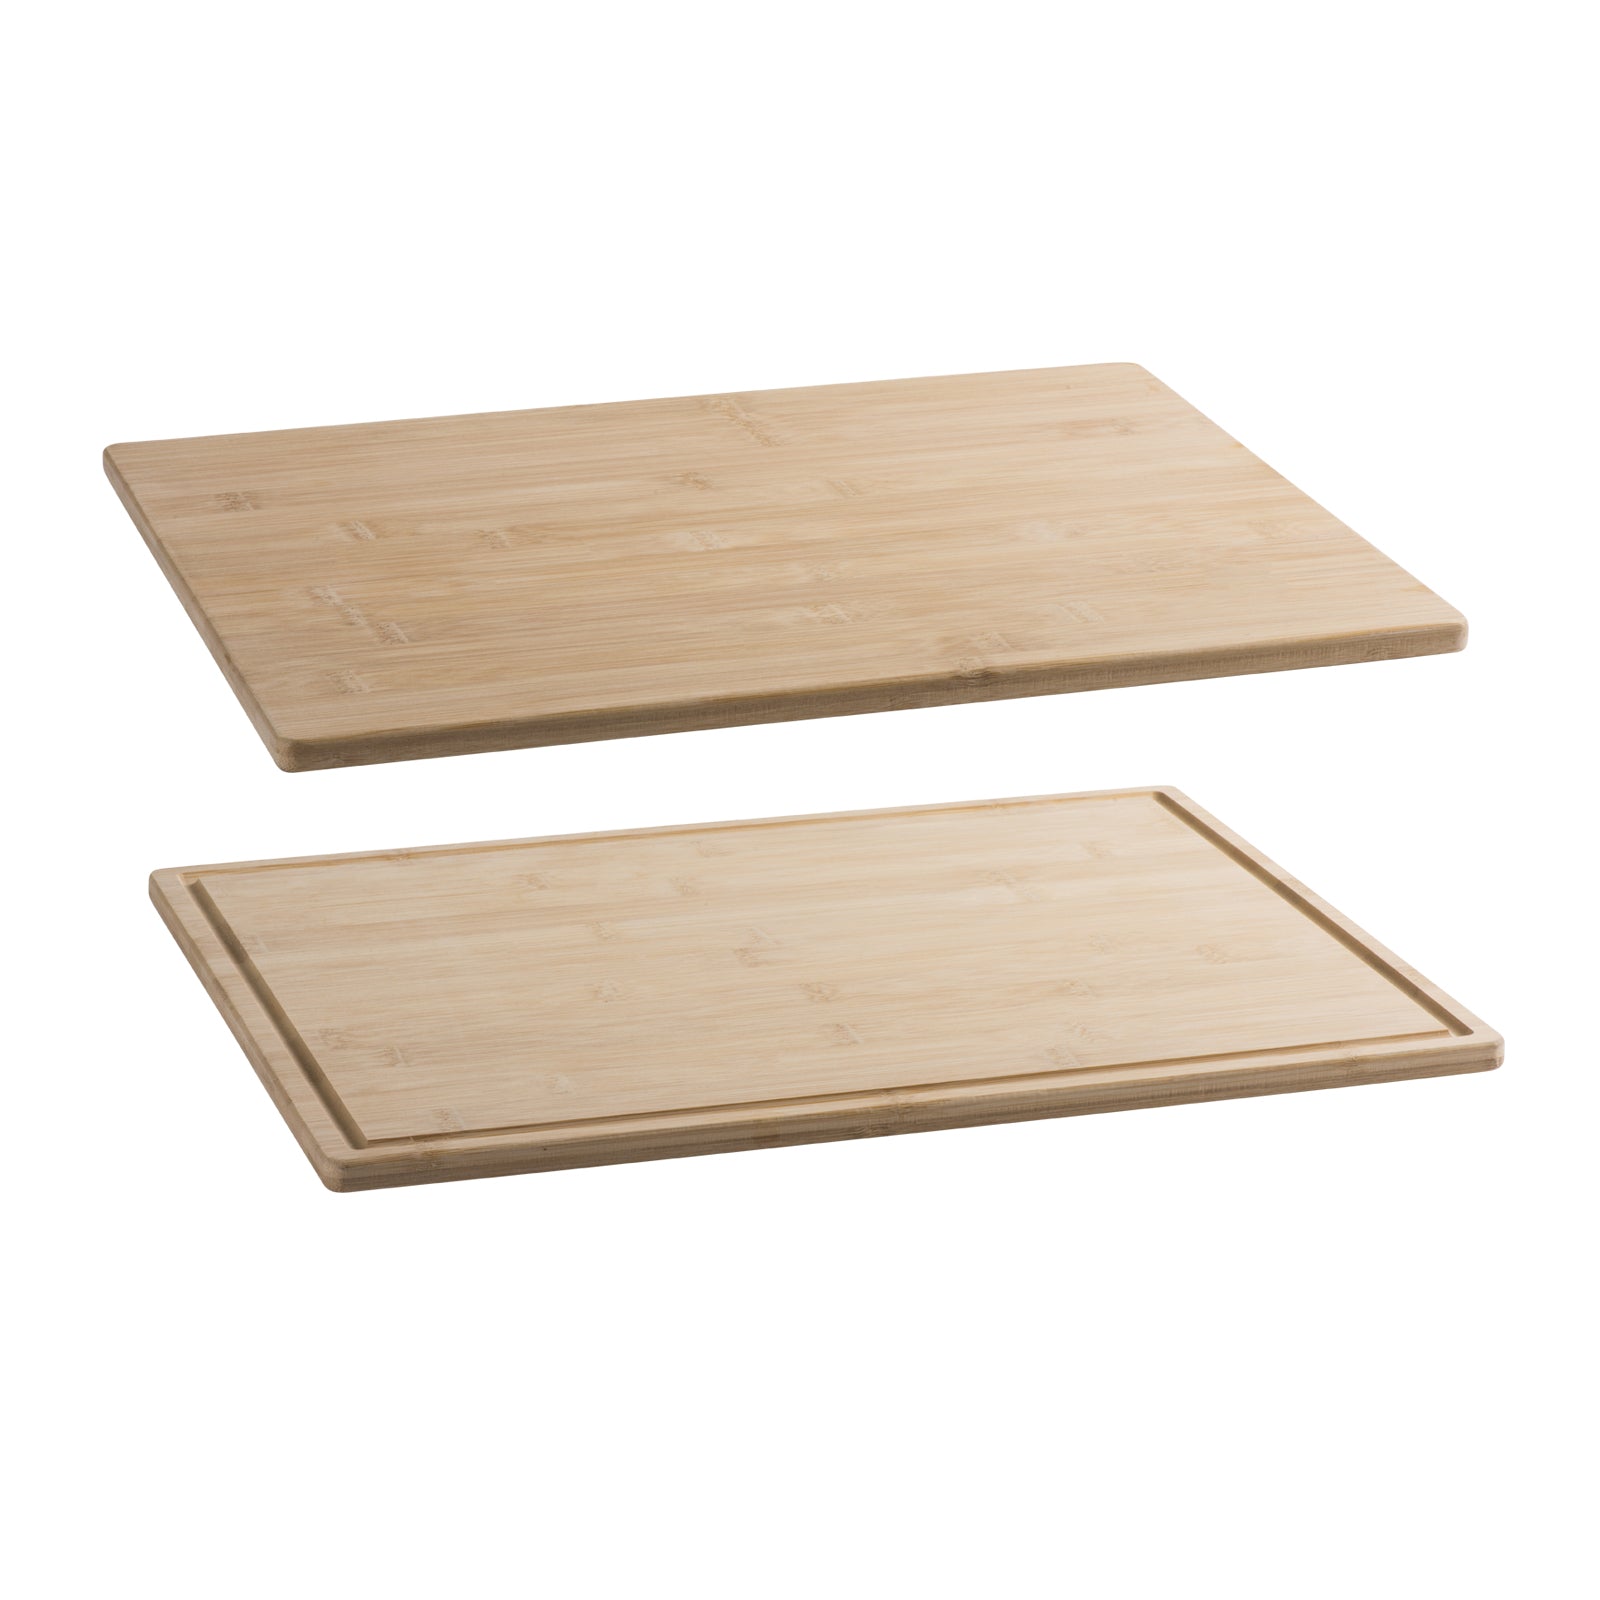 Bamboo Cutting Board Tray 12x12x0.5 3 Pack Eco Friendly Wooden Serving Trays